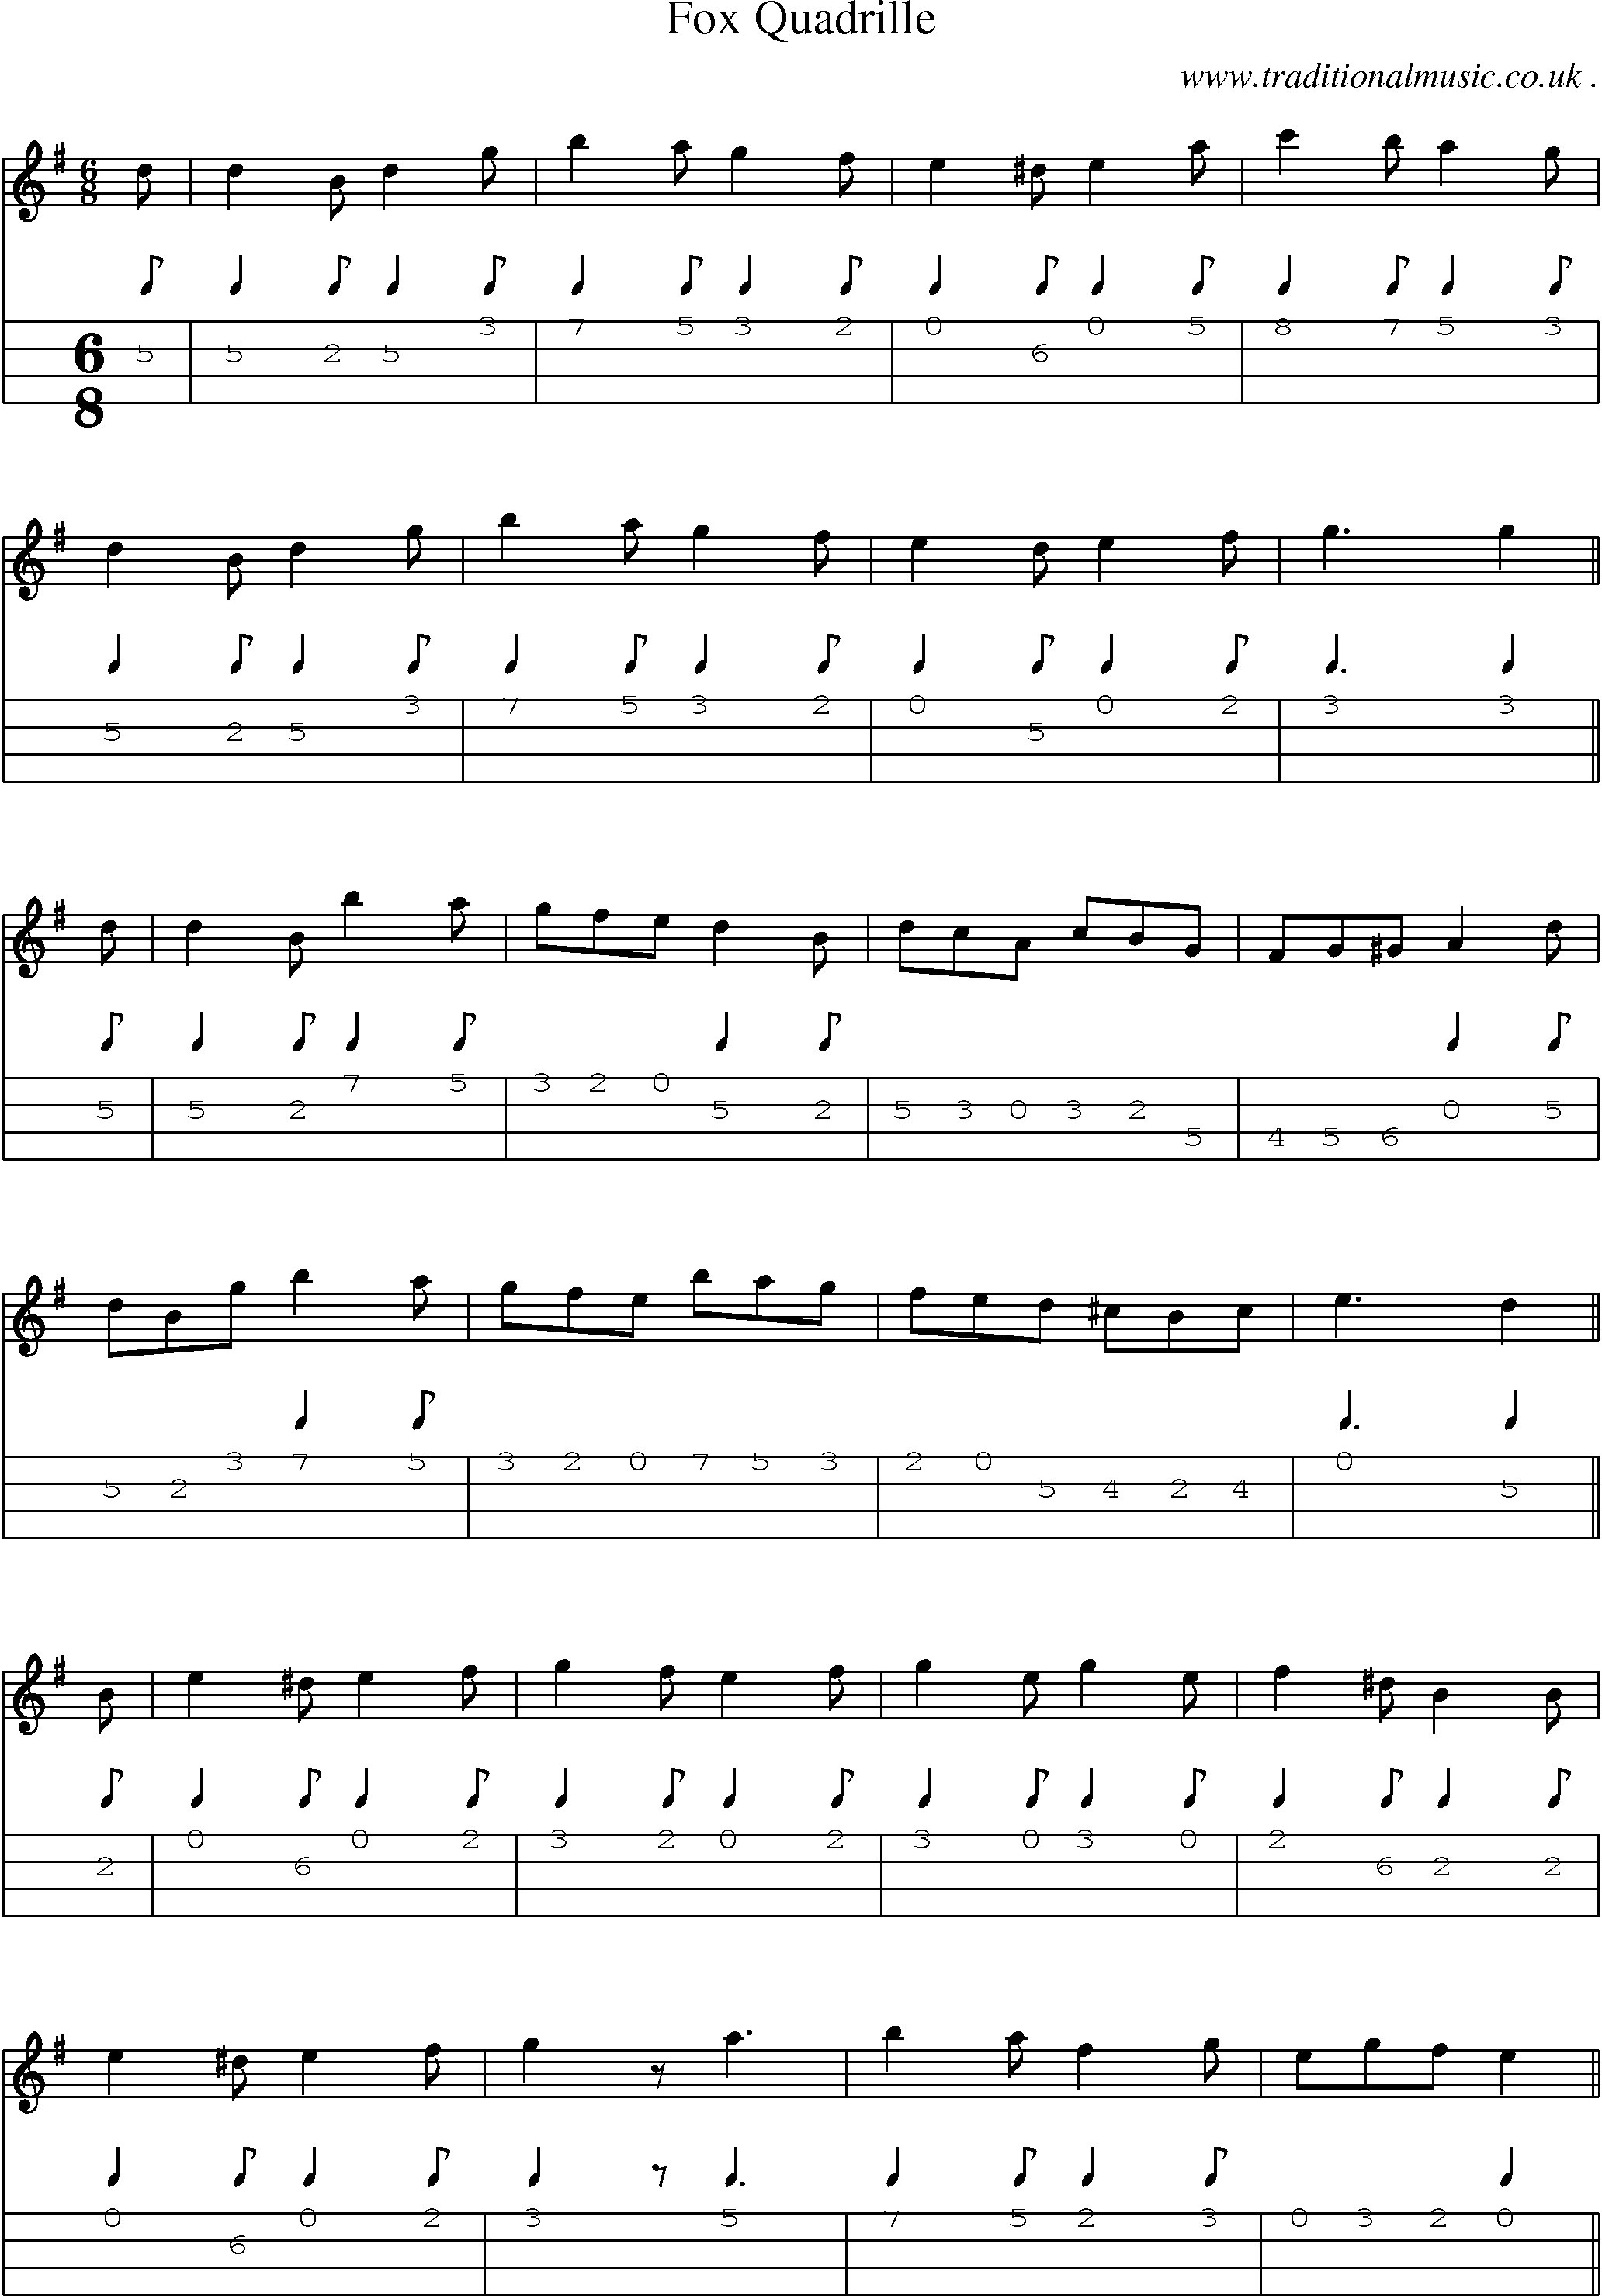 Sheet-Music and Mandolin Tabs for Fox Quadrille